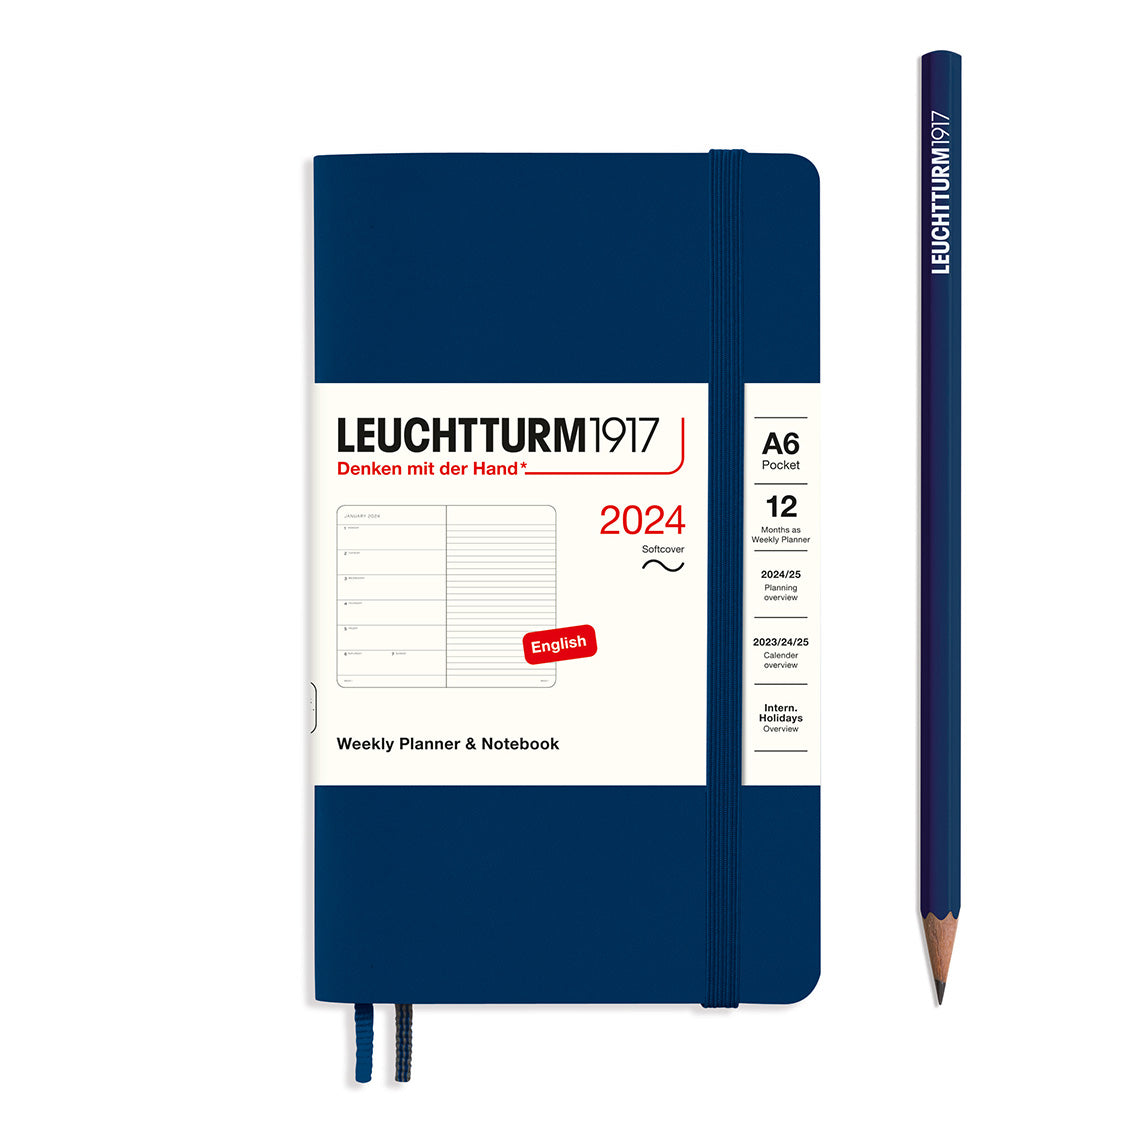 An image of a navy planner with a navy elastic band holding it together and a cream paper wrap around the middle stating the business name Leuchtturm1917, that it is for the year 2024, it is a weekly planner and notebook, is A6 in size and an English language version. It has an image on the wrap showing the inside layout which is a week on the left hand page and a notes page on thr right hand page. A navy pencil is shown at the side of the planner.